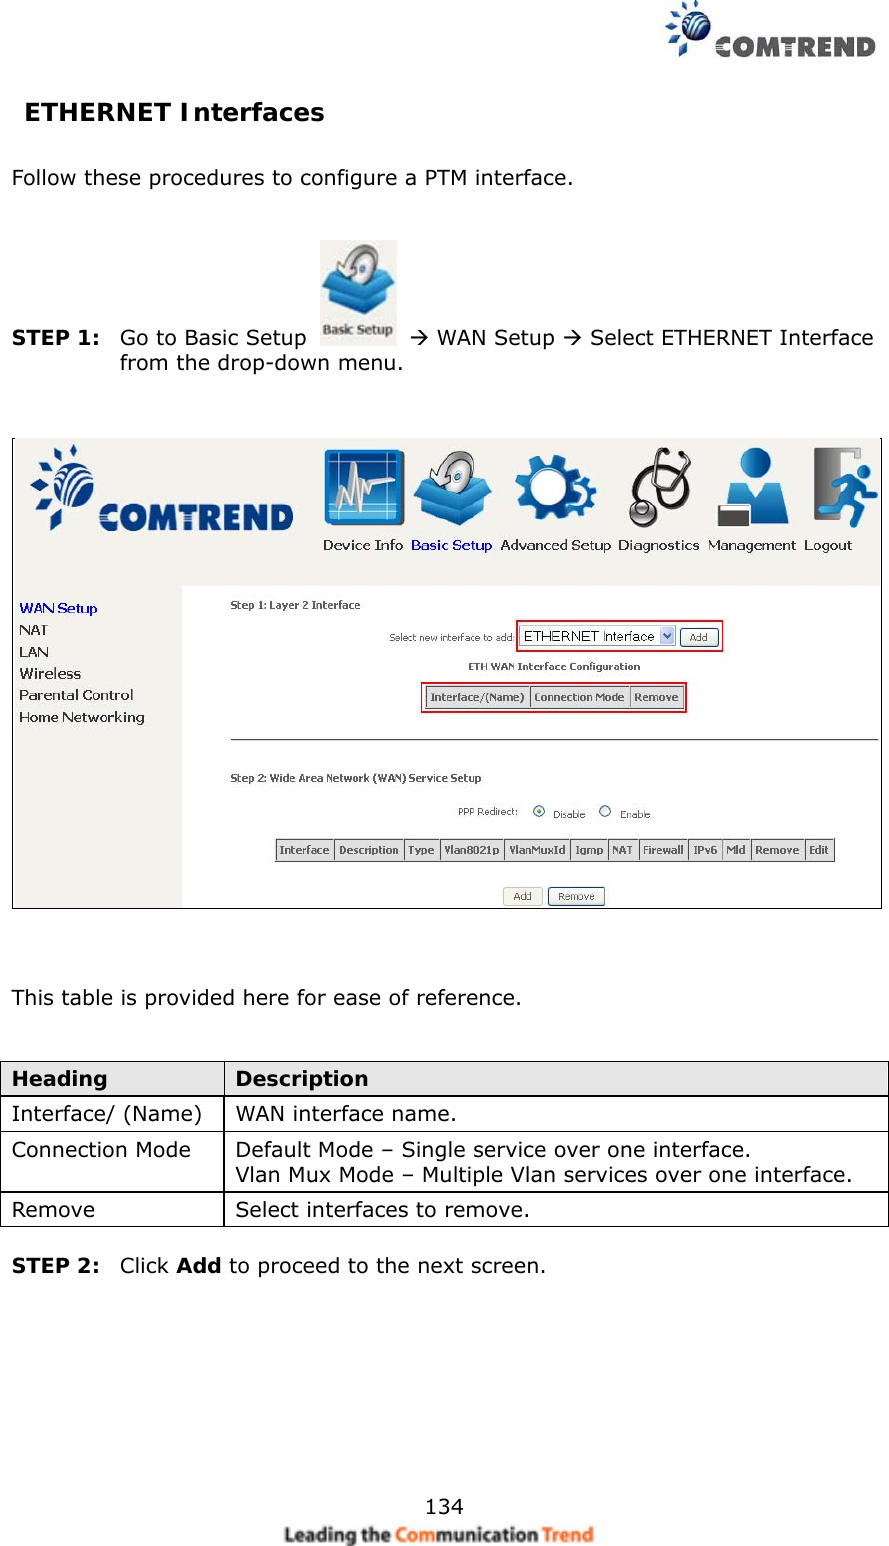    134 ETHERNET Interfaces Follow these procedures to configure a PTM interface.       STEP 1:  Go to Basic Setup    WAN Setup  Select ETHERNET Interface from the drop-down menu.       This table is provided here for ease of reference.   Heading  Description Interface/ (Name)  WAN interface name. Connection Mode  Default Mode – Single service over one interface. Vlan Mux Mode – Multiple Vlan services over one interface. Remove  Select interfaces to remove.  STEP 2:  Click Add to proceed to the next screen.     